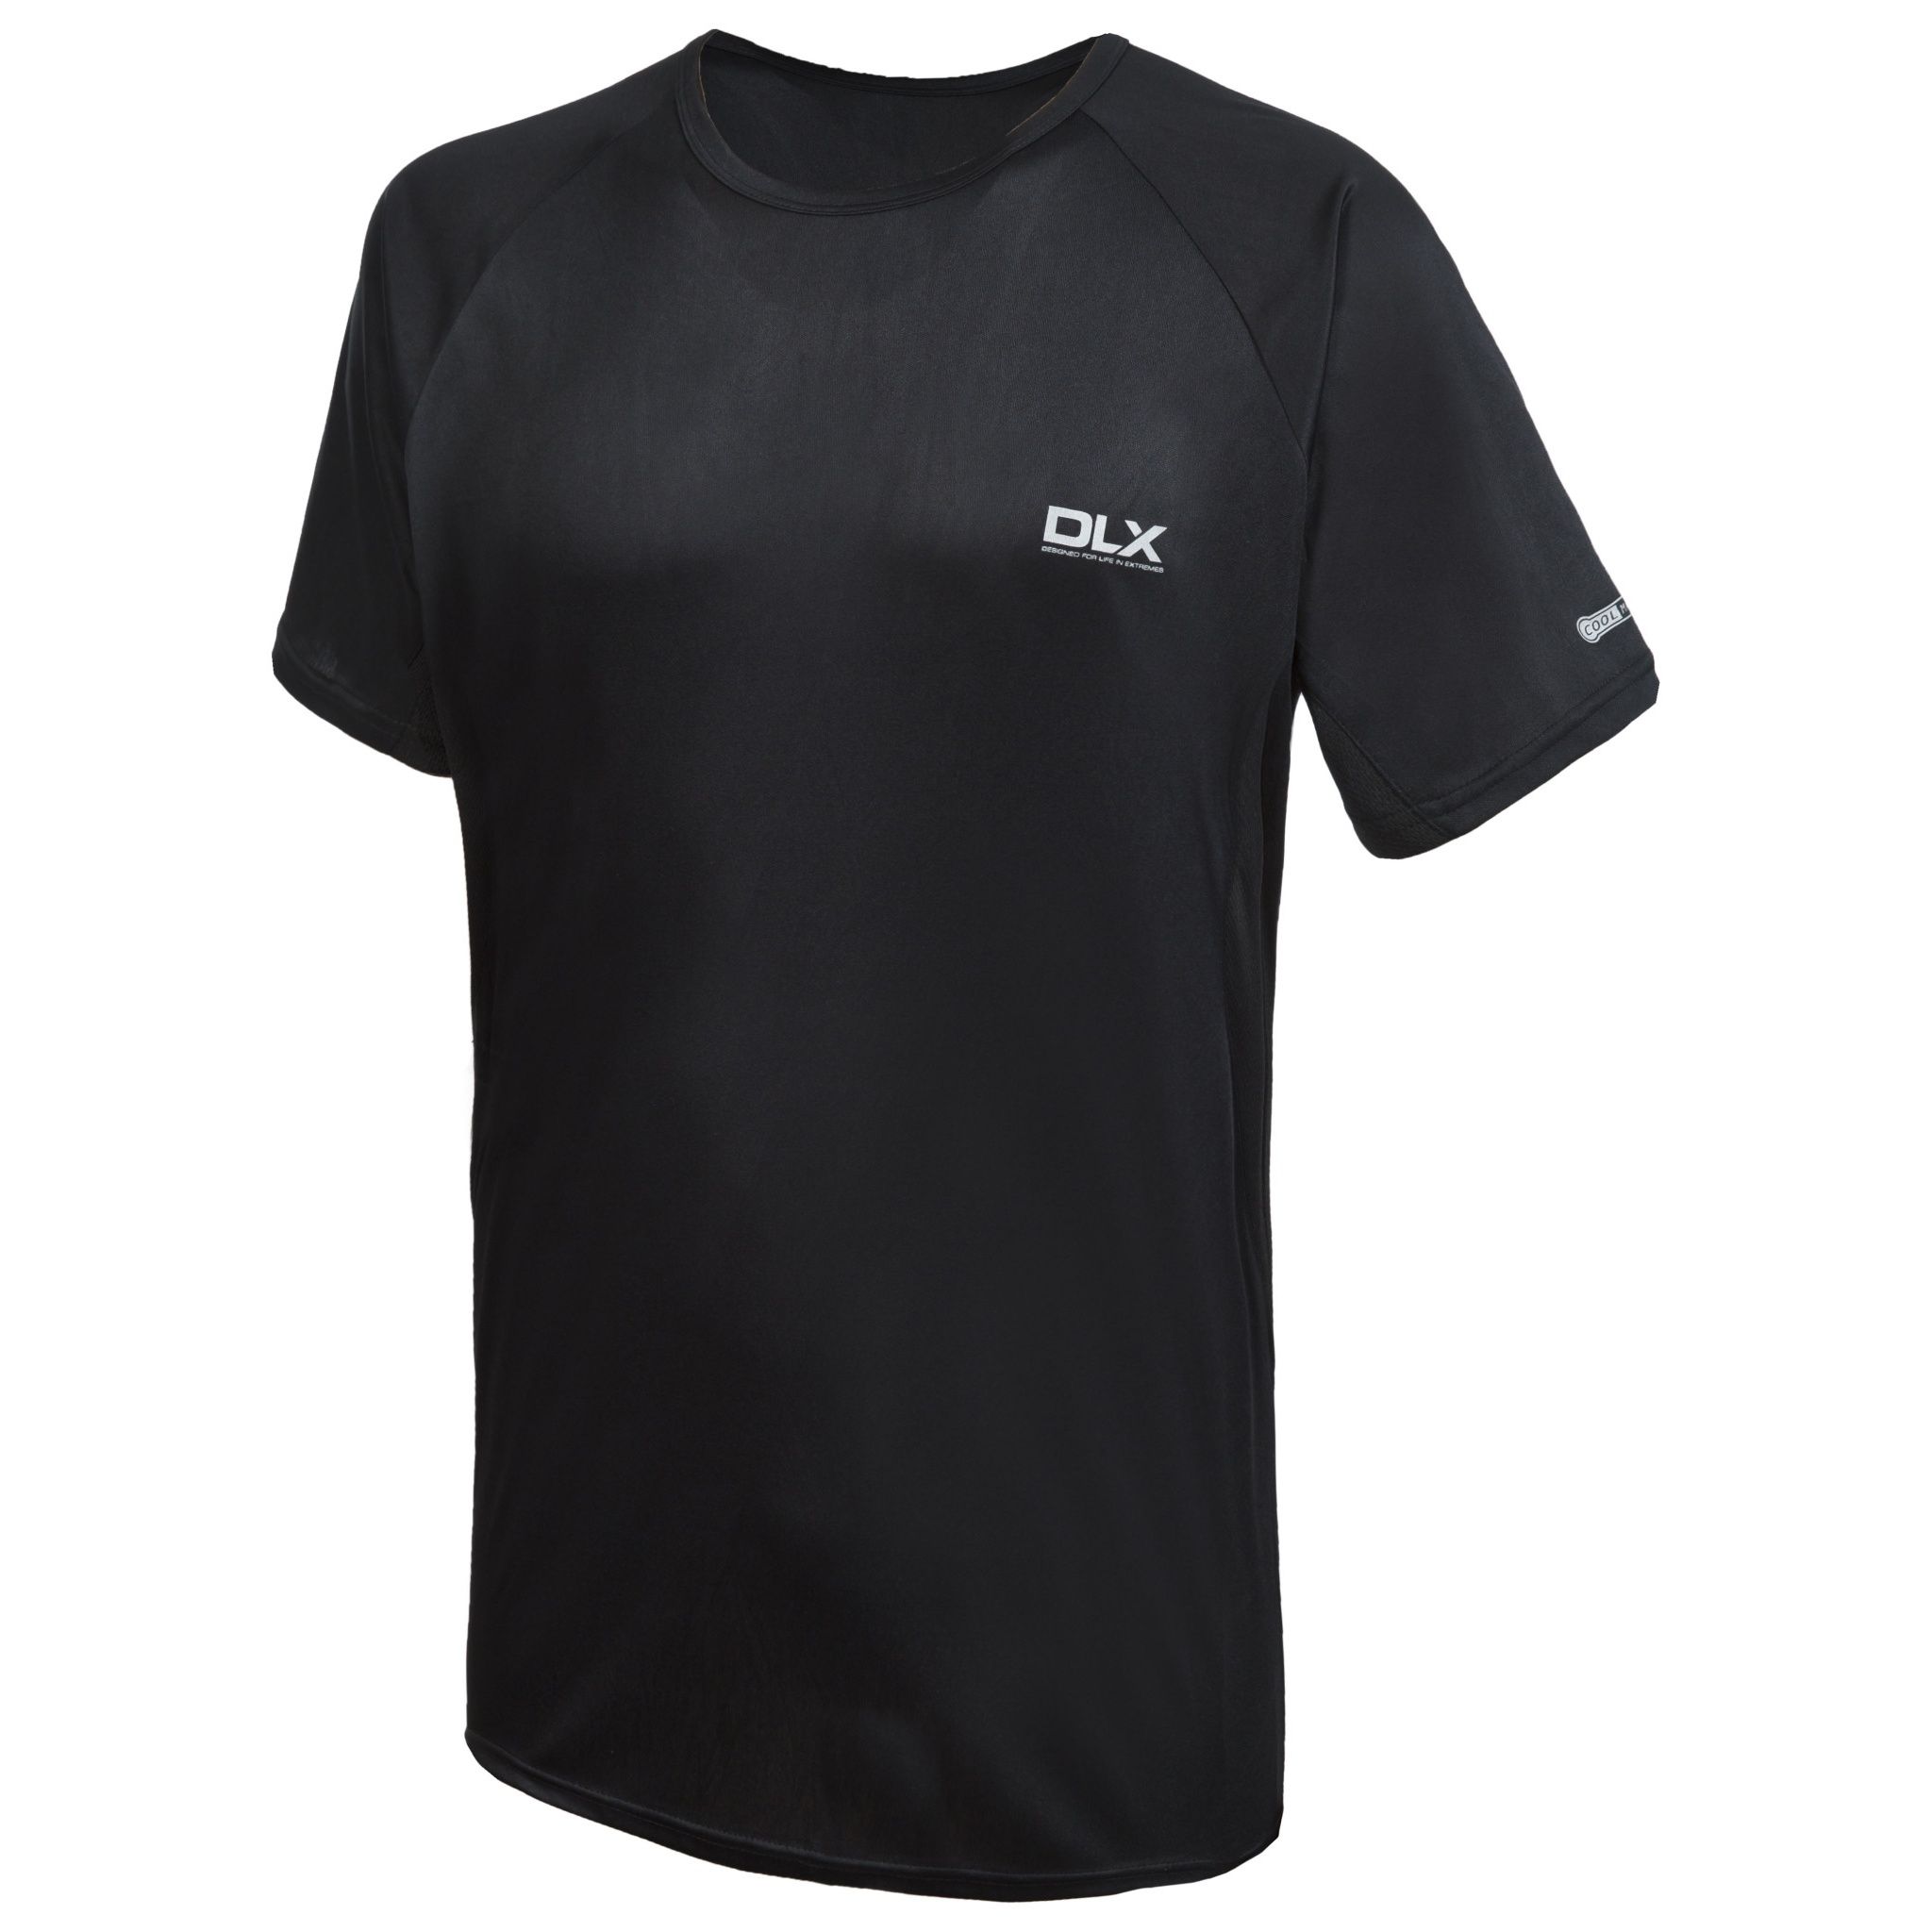 Mens active DLX t-shirt. Short sleeves. Coolmax technology. Round neck. Wicking properties. Contrasting underarm and back panels. Quick drying. Reflective print on back. Fabric: 100% Polyester. Mens Chest Sizing (approx): S - 35-37in/89-94cm, M - 38-40in/96.5-101.5cm, L - 41-43in/104-109cm, XL - 44-46in/111.5-117cm, XXL - 46-48in/117-122cm, 3XL - 48-50in/122-127cm.